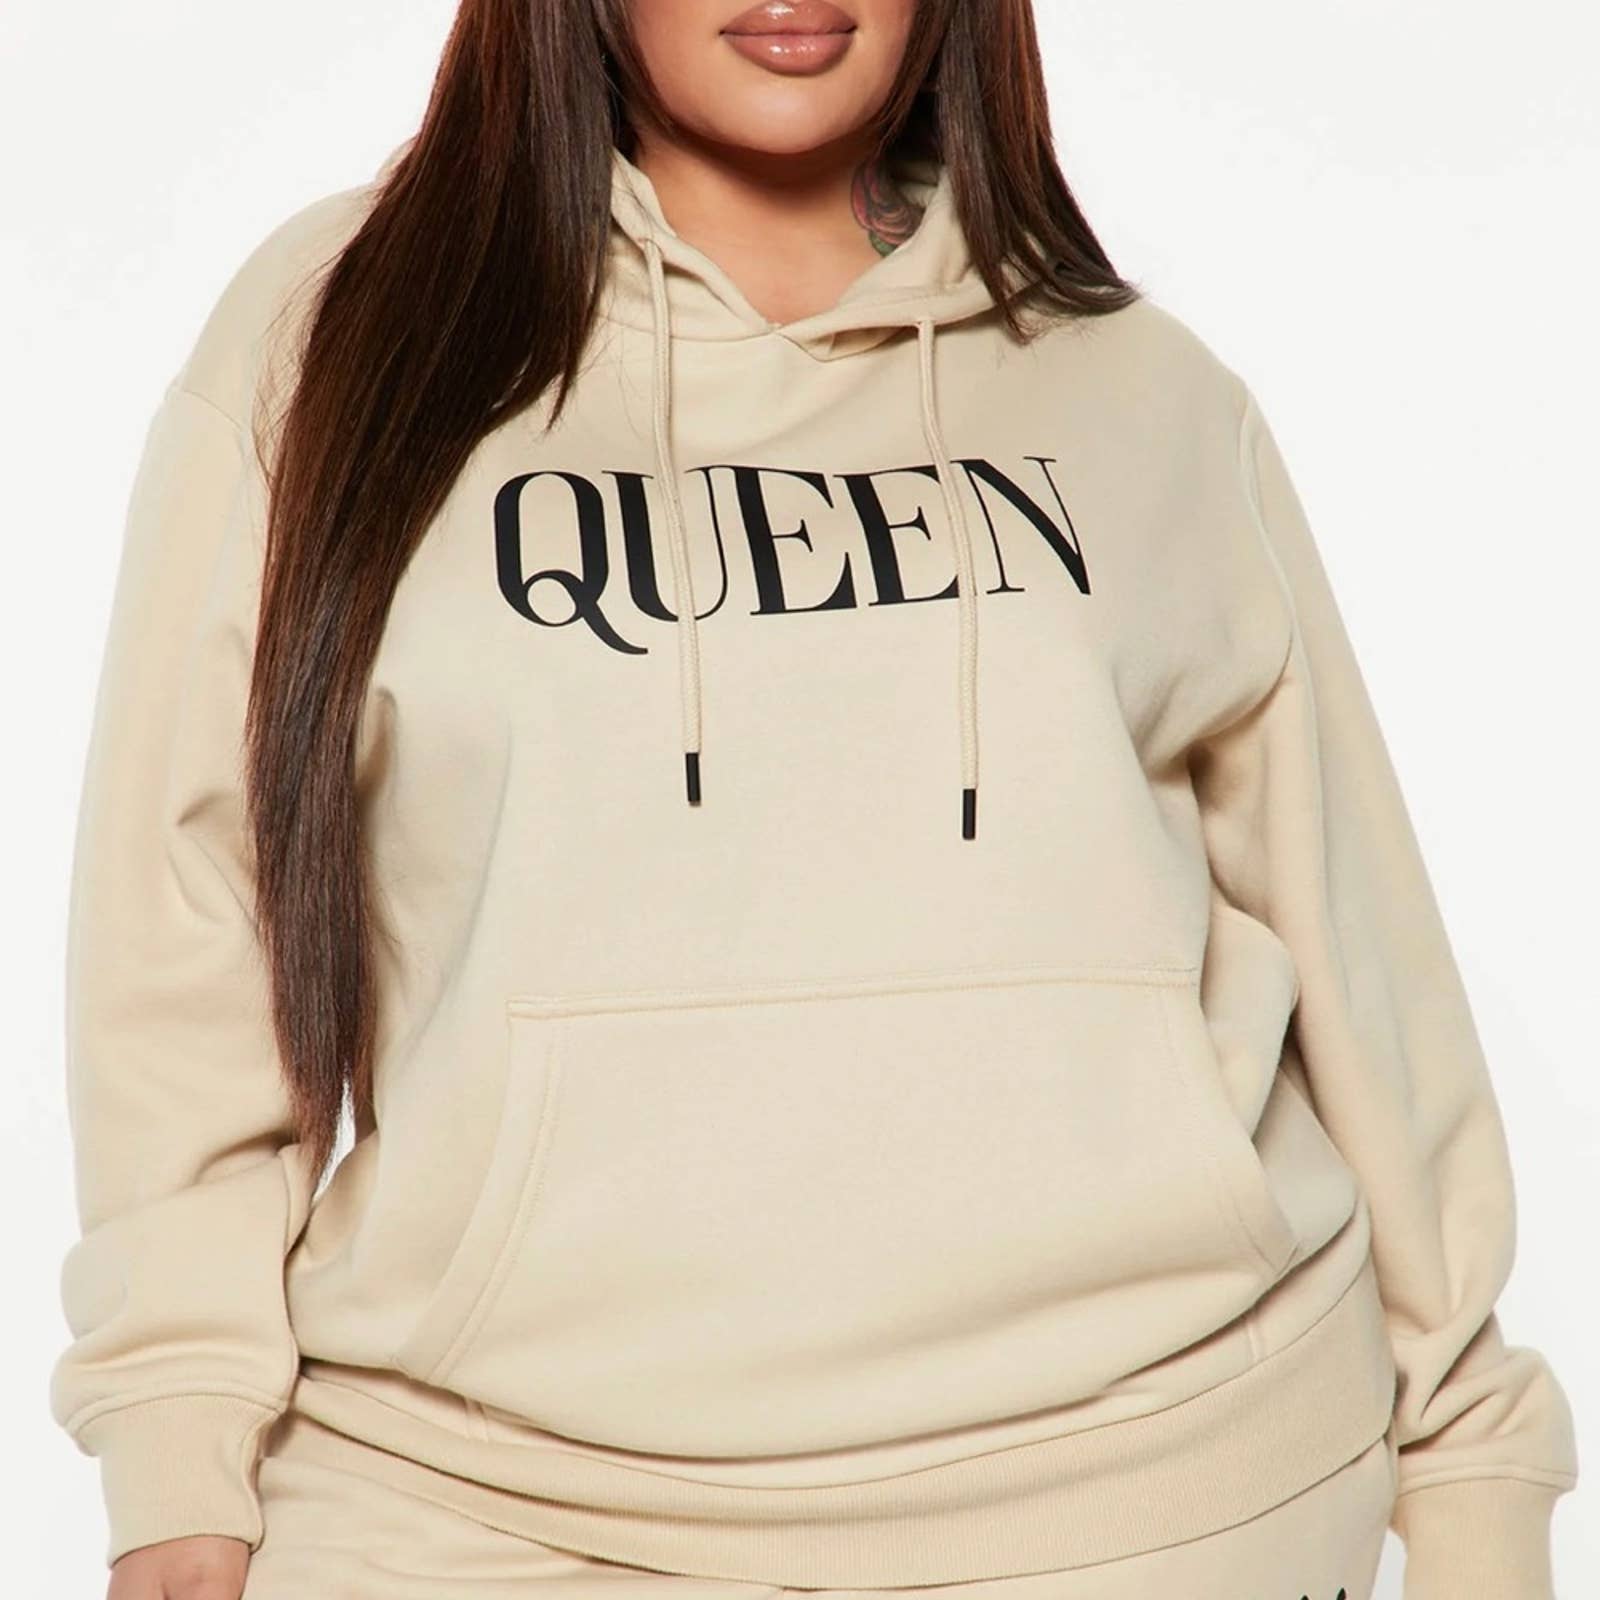 Oversized Tan Queen Hoodie Sweatshirt Custom Made by Passion of Essence - Passion of Essence Boutique